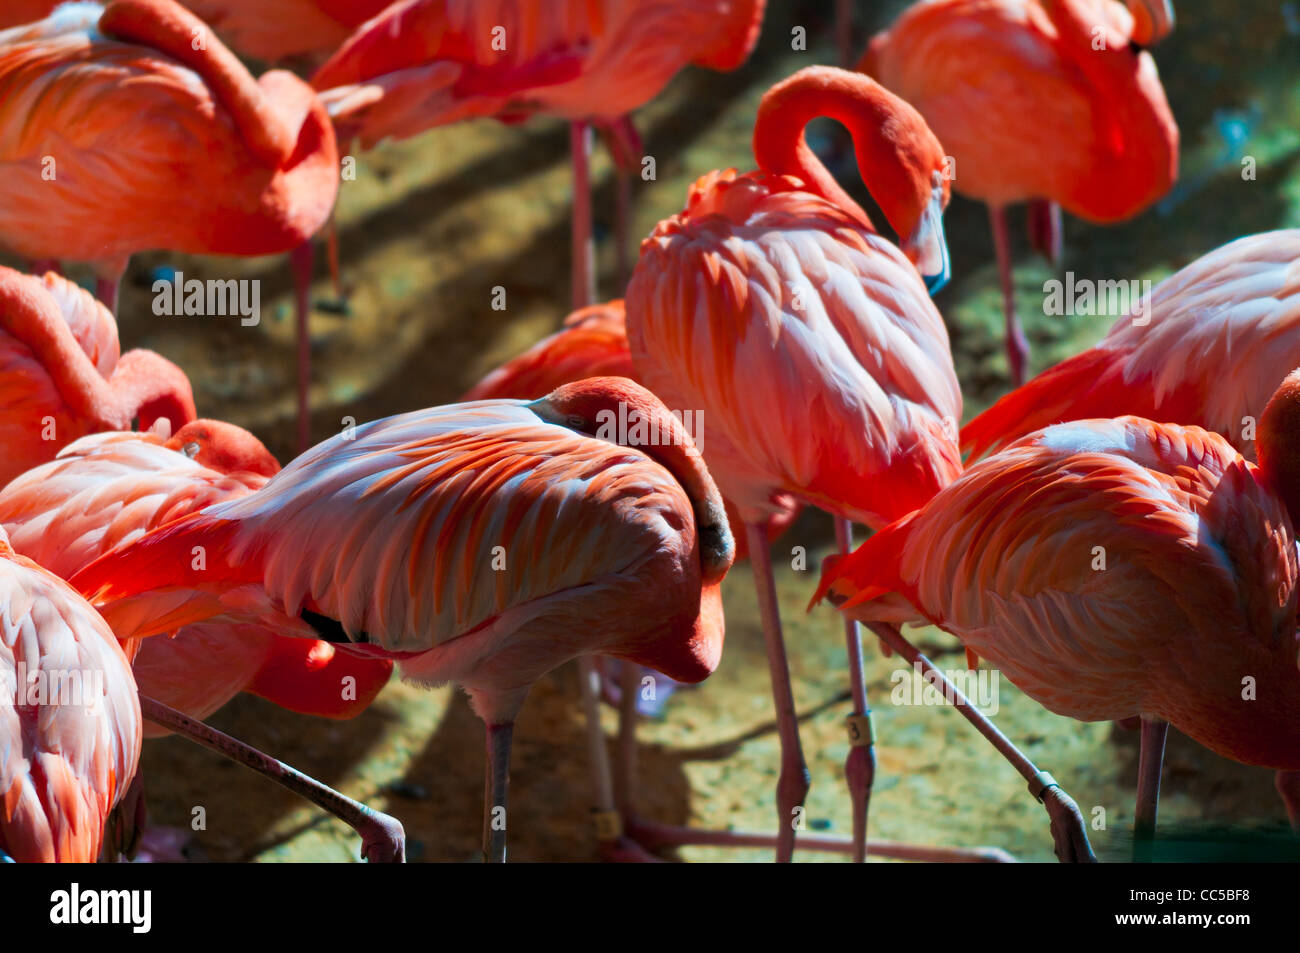 Group of Flamingos standing on a sandy shore Stock Photo